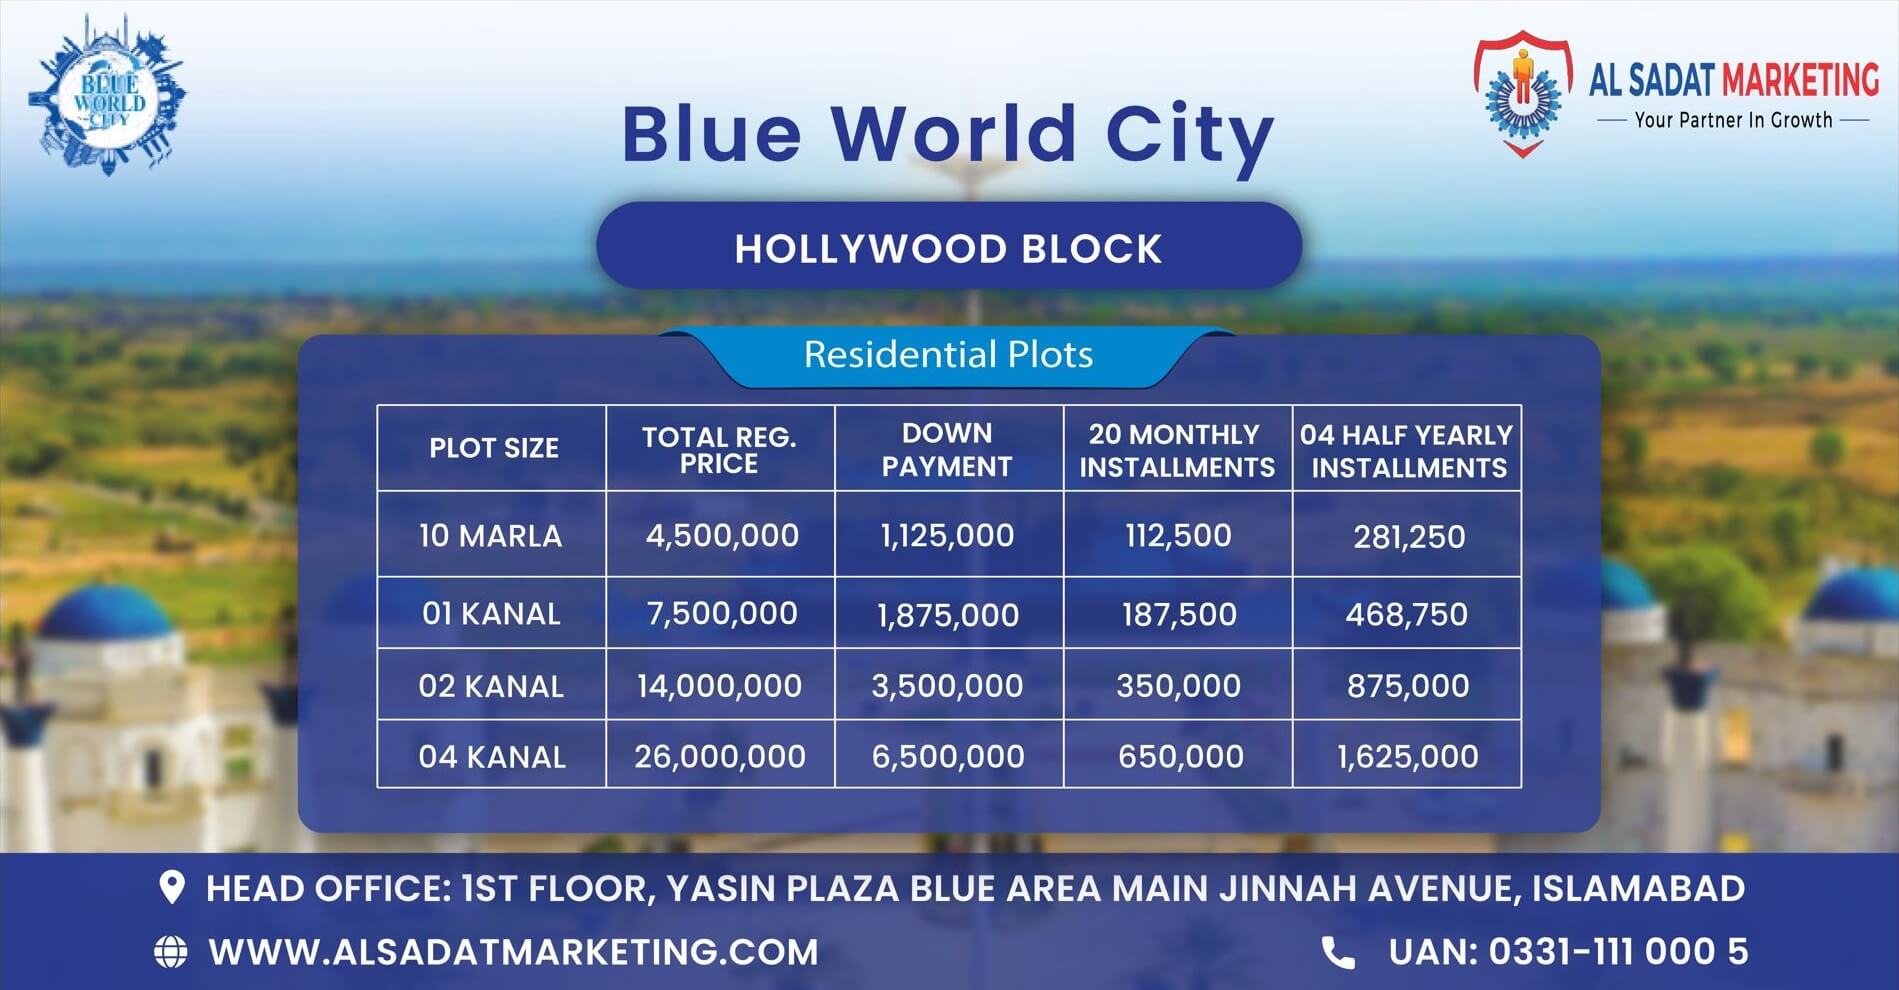 blue world city hollywood block residential plots payment plan – blue world city islamabad hollywood block residential plots payment plan – blue world city rawalpindi hollywood block residential plots payment plan – blue world city hollywood block payment plan – blue world city islamabad hollywood block payment plan – blue world city rawalpindi hollywood block payment plan – blue world city payment plan – blue world city islamabad payment plan - blue world city rawalpindi payment plan – blue world city– blue world city islamabad – blue world city rawalpindi– blue world city housing society – blue world city islamabad housing society – blue world city real estate project – blue world city islamabad real estate project - al sadat marketing - alsadat marketing - al-sadat marketing